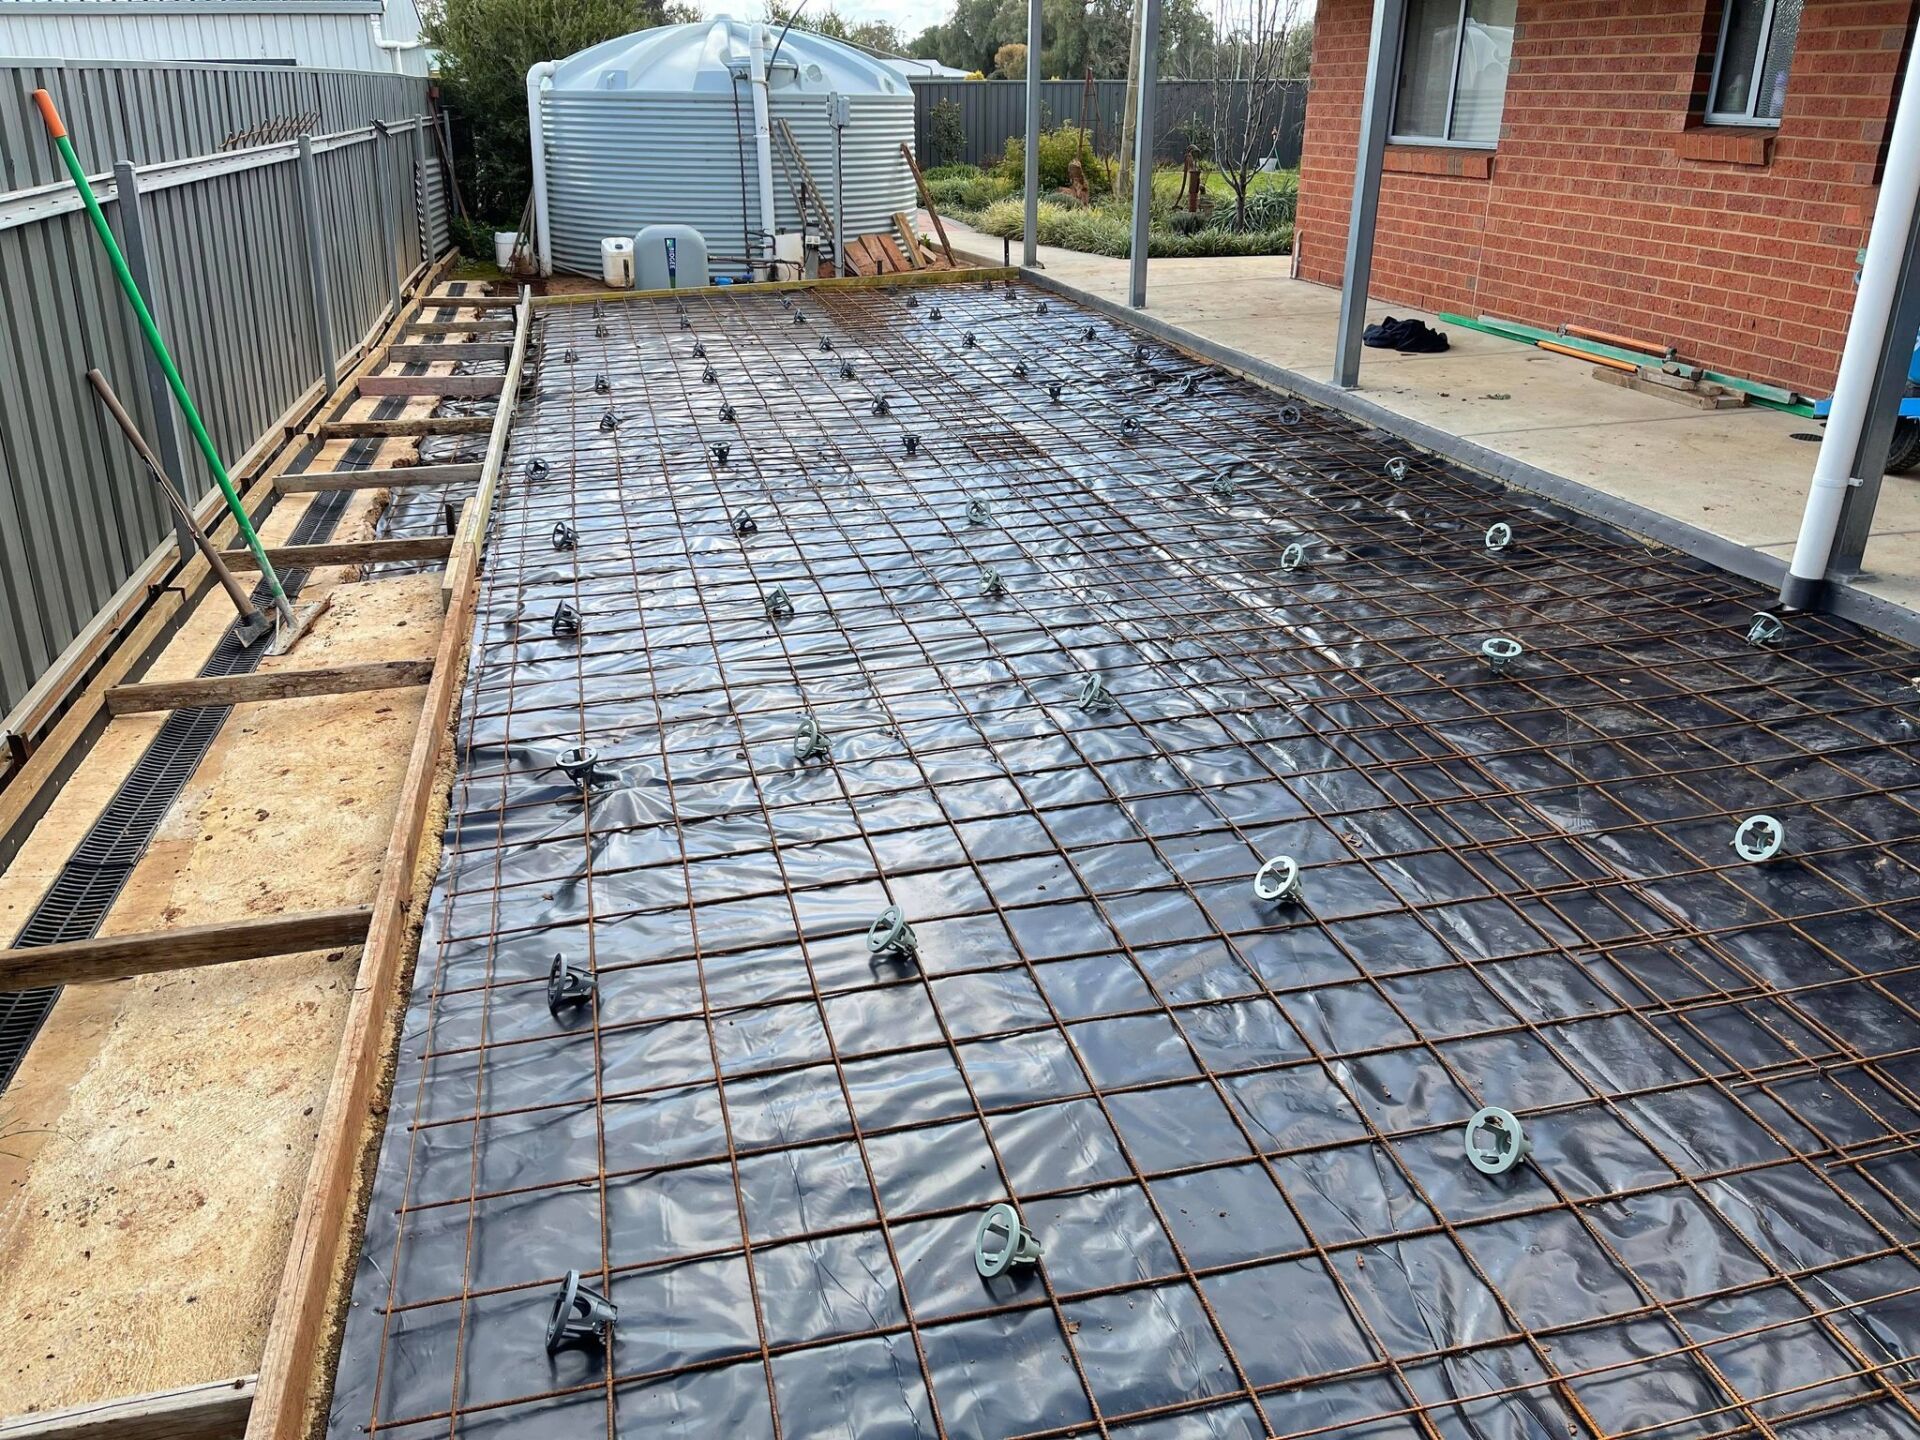 Concrete Driveway foundations to reinforce it before concrete is poured.